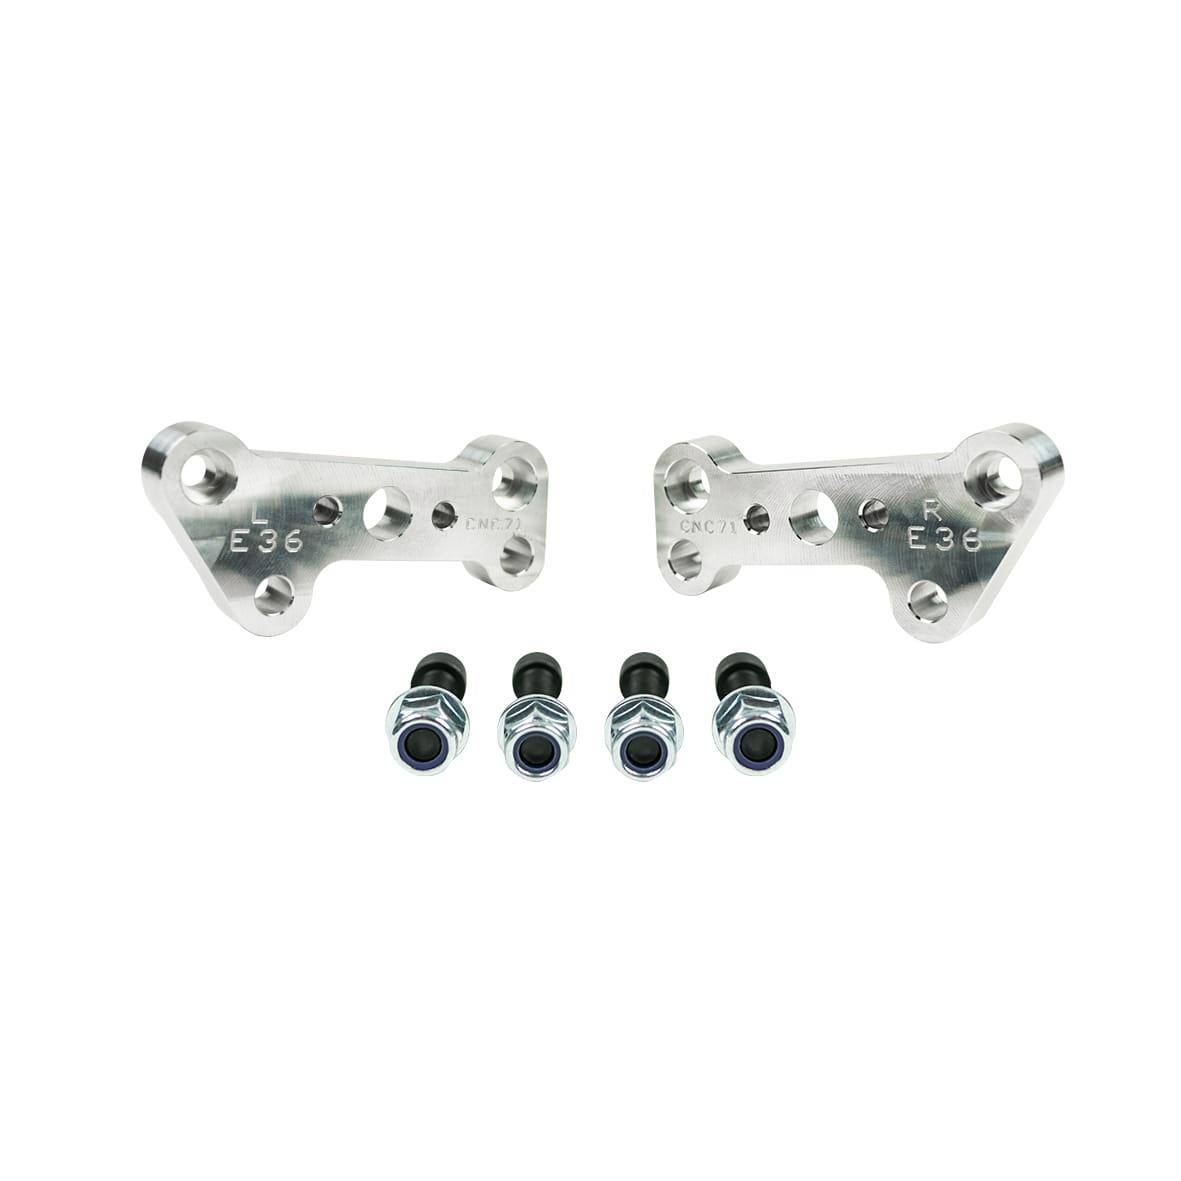 BMW E36 steering adapters - STOCK ARM